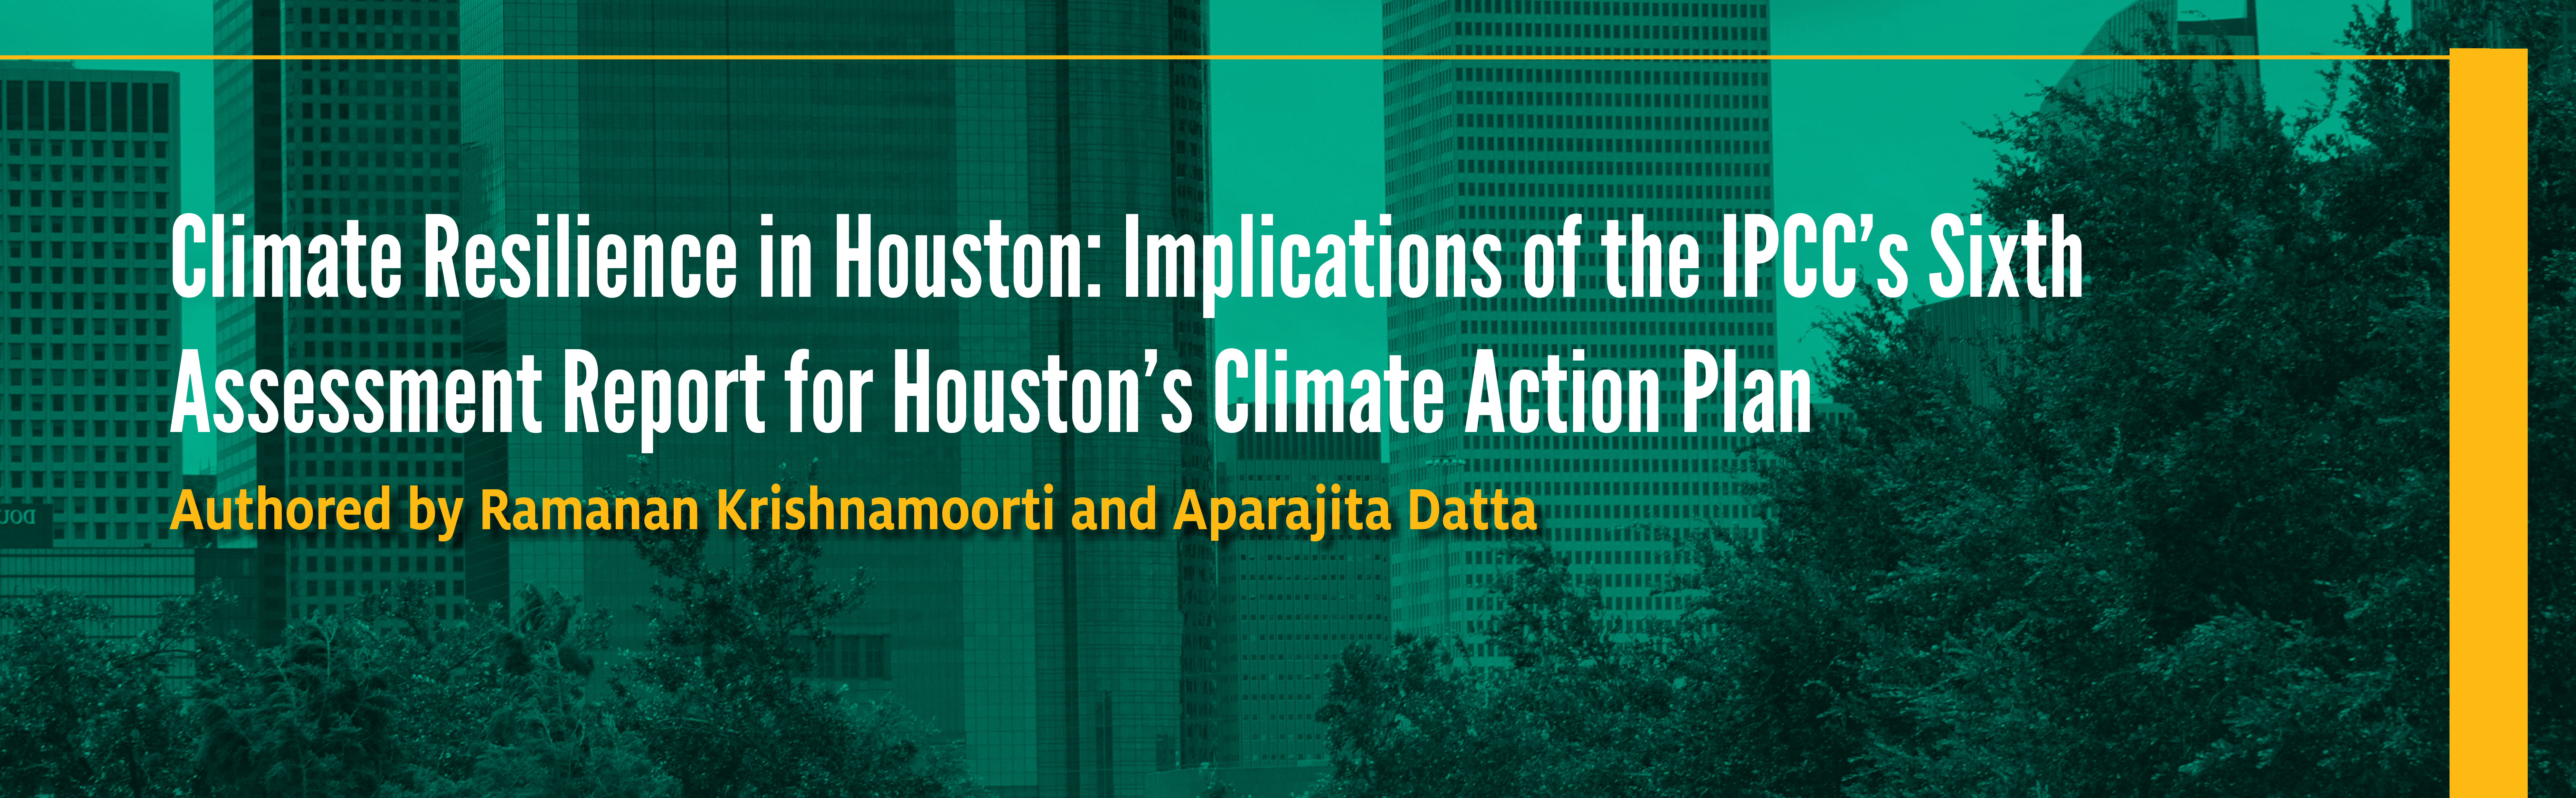 CLIMATE RESILIENCE IN HOUSTON: IMPLICATIONS OF THE IPCC’S SIXTH ASSESSMENT REPORT FOR HOUSTON’S CLIMATE ACTION PLAN - Click here to read this White Paper